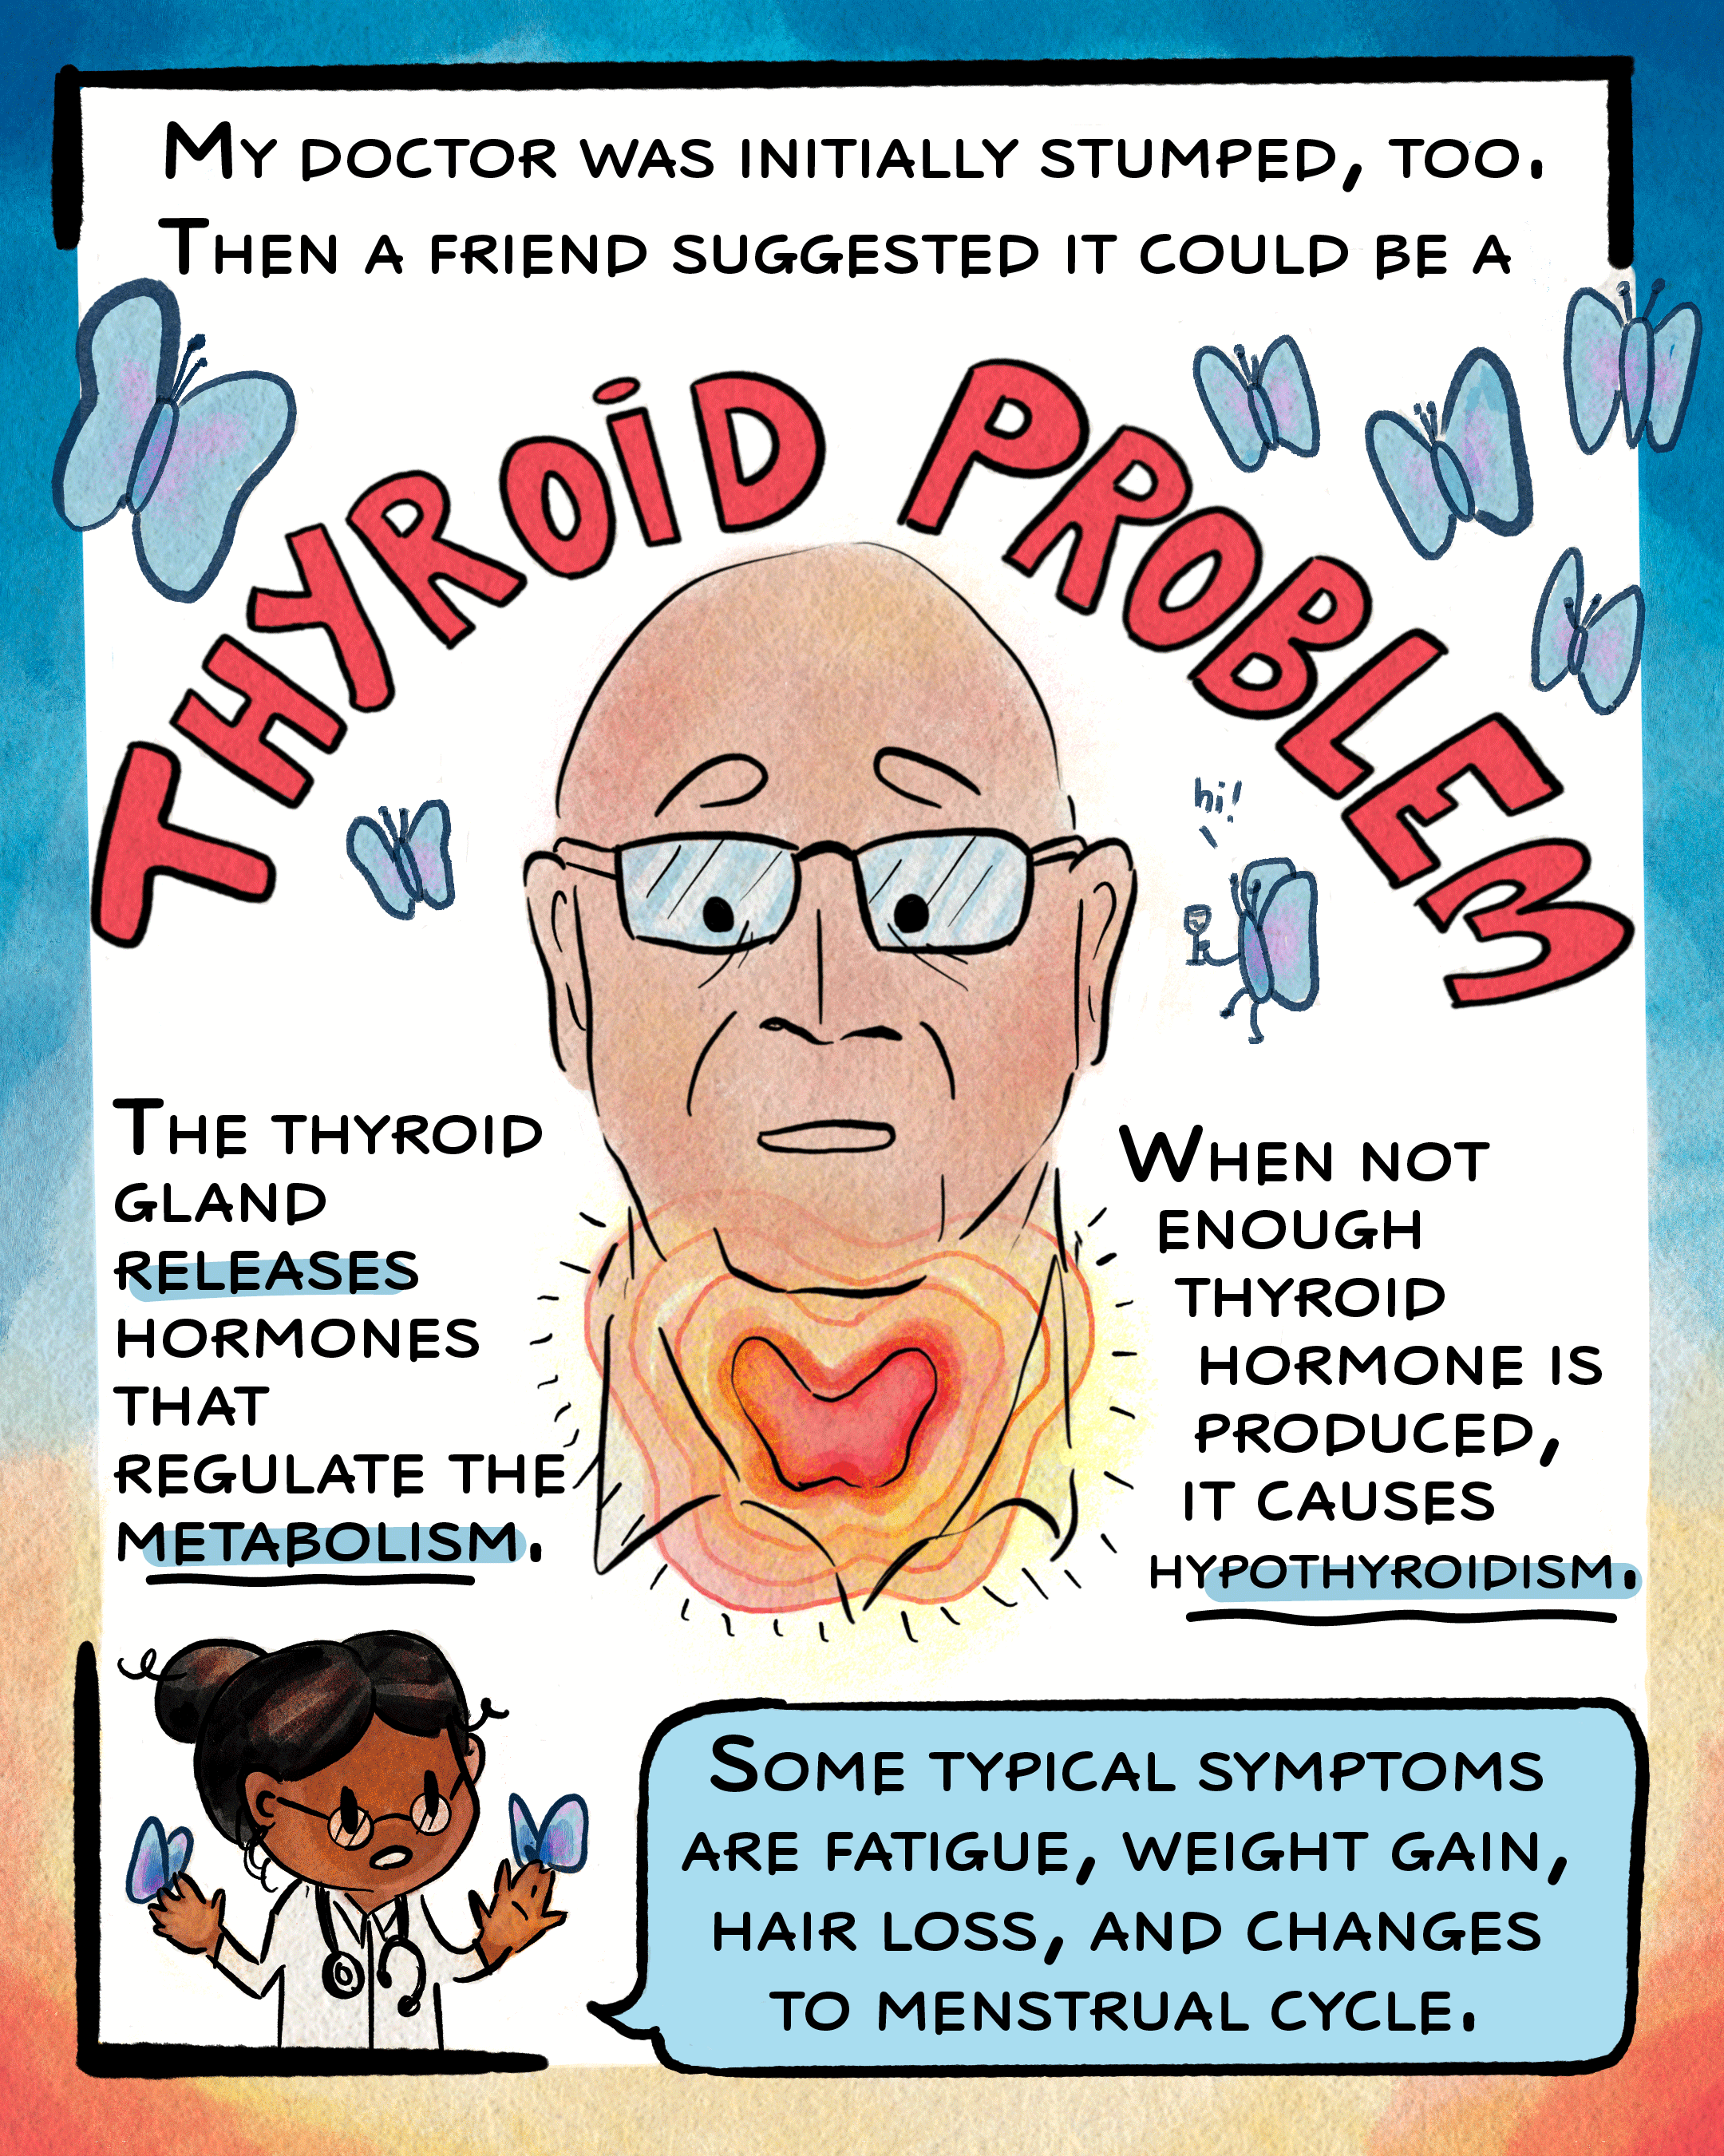 This second page reads, “my doctor was initially stumped, too. Then a friend suggested it could be a…” at the top of the page, and leads into a large arc of text that says, “thyroid problem” above a drawing of Miller’s neck and head. The thyroid, a butterfly-shaped gland in the neck, is highlighted with radiating shades of pink and yellow. Beside Miller, text reads, “the thyroid gland releases hormones that regulate metabolism. When not enough thyroid hormone is produced, it causes hypothyroidism.” The final panel below shows a doctor saying, “Some typical symptoms are fatigue, weight gain, hair loss, and changes to menstrual cycle.”